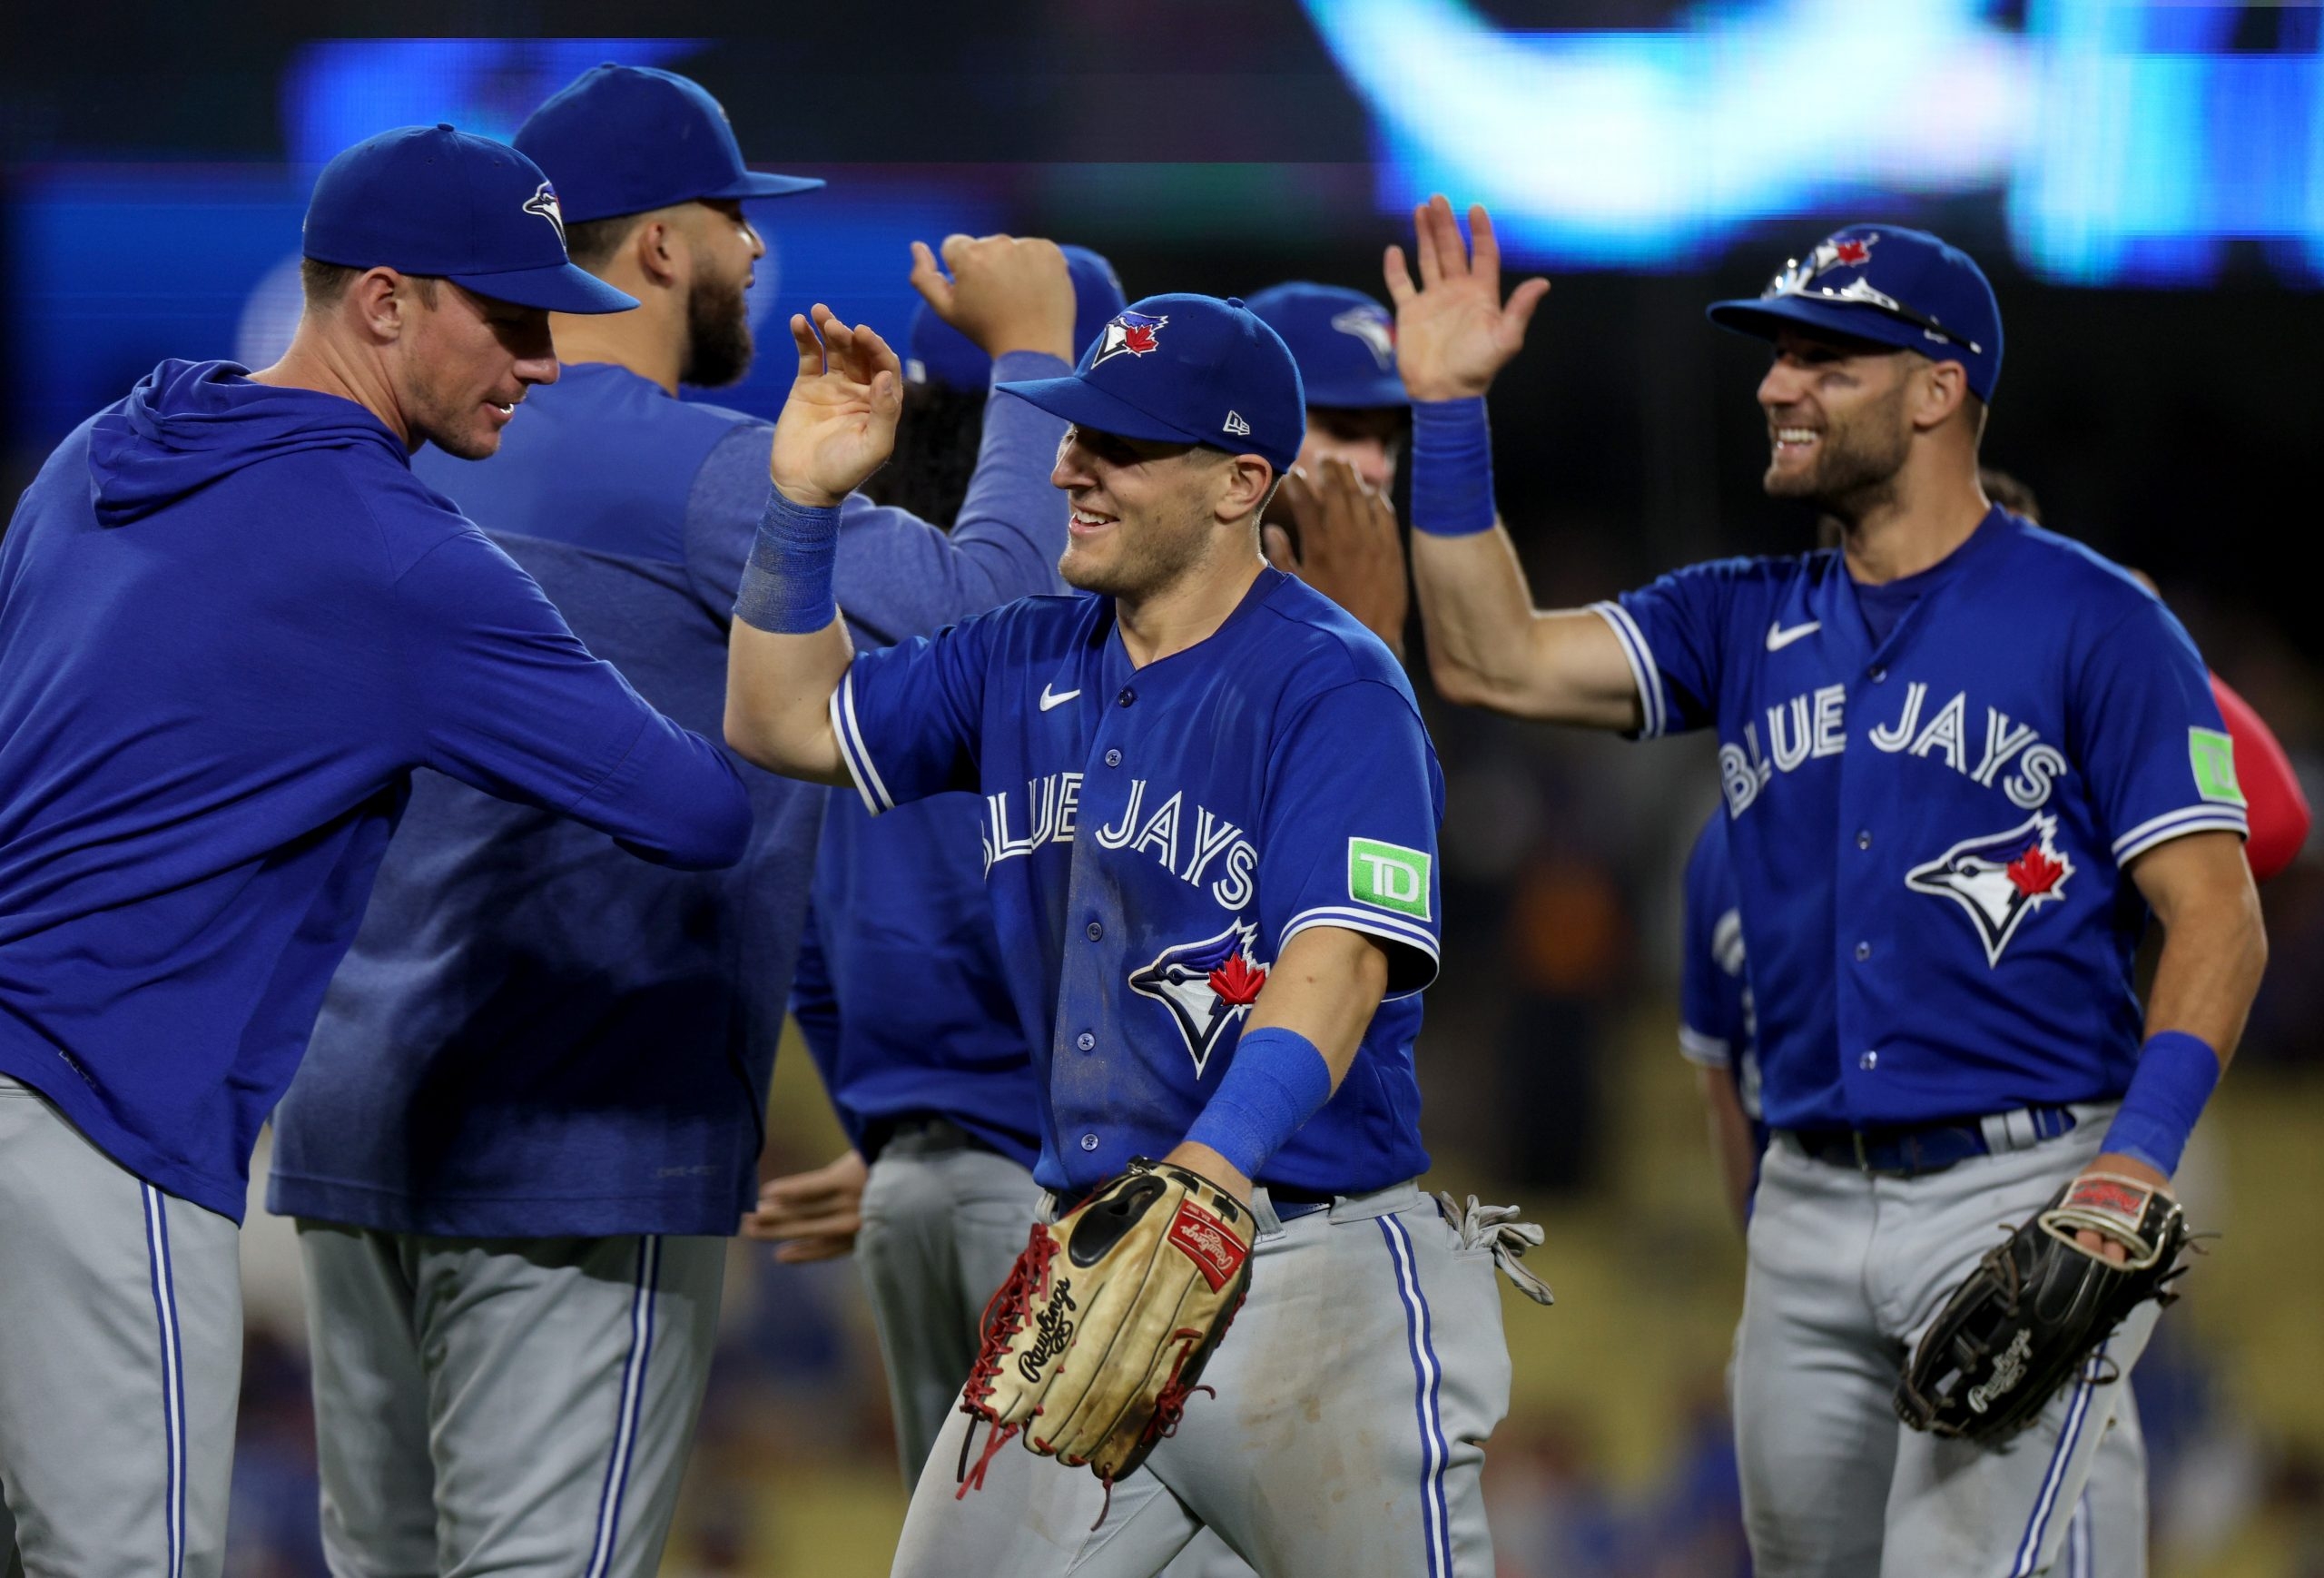 Blue Jays manager John Schneider on the hot seat? Don't be